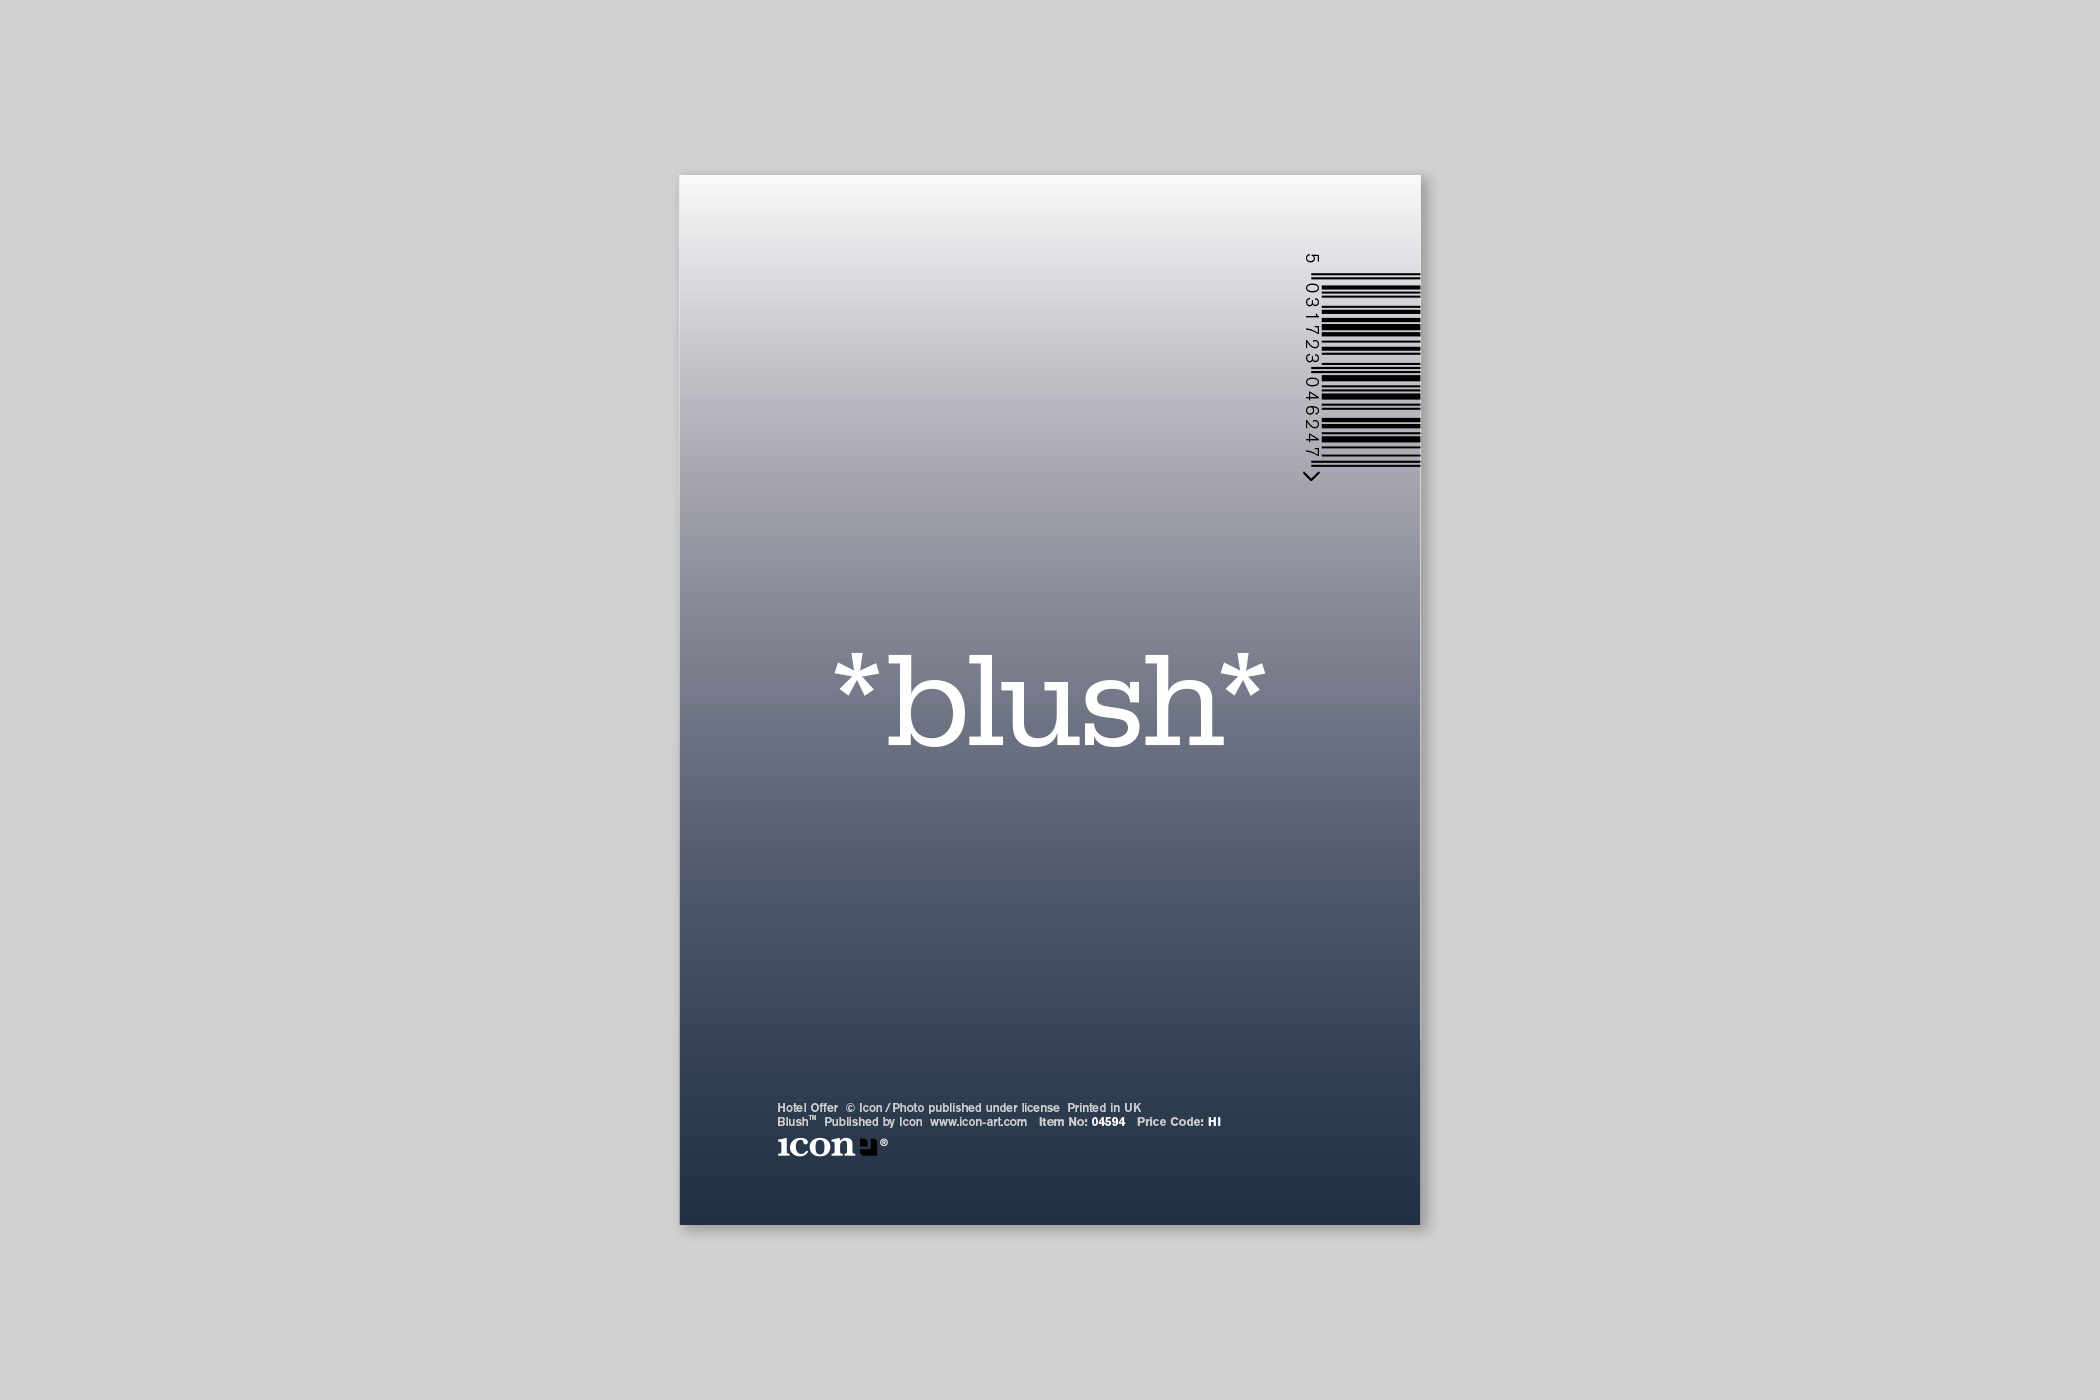 Hotel Offer from Blush humour range of greeting cards by Icon, with envelope.